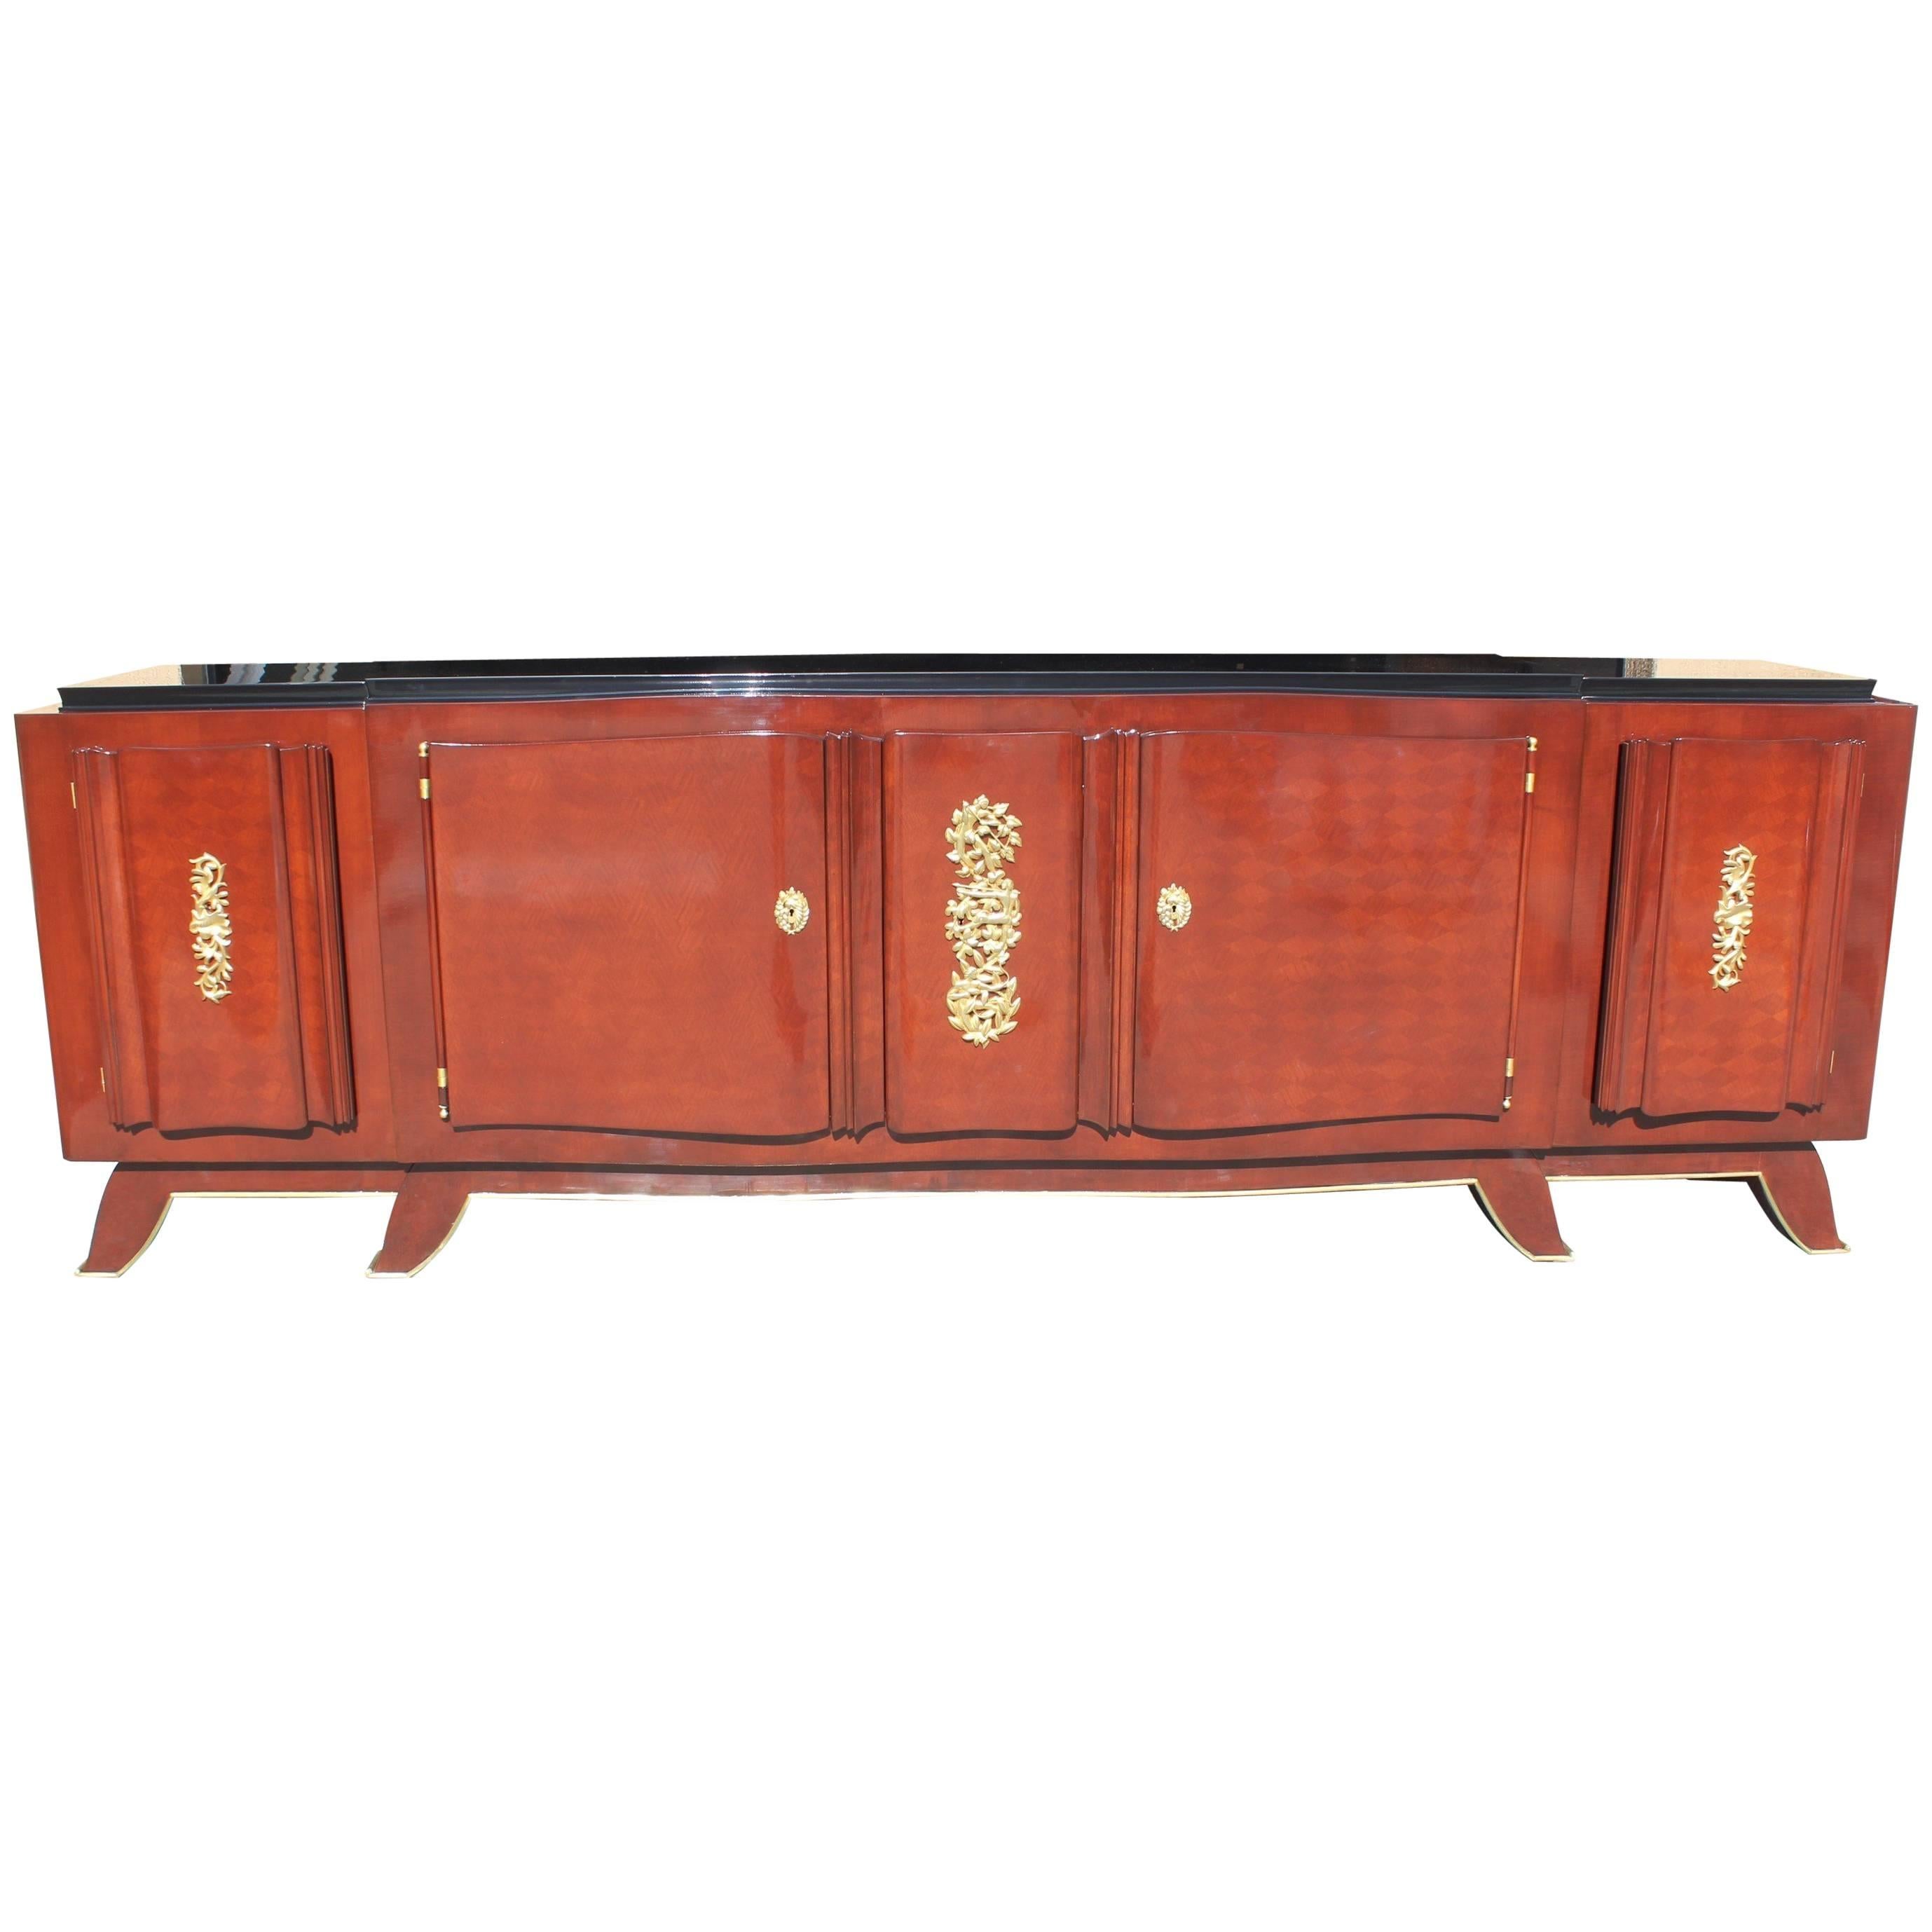 Impressive French Art Deco Rosewood Sideboard by Jules Leleu, circa 1935s